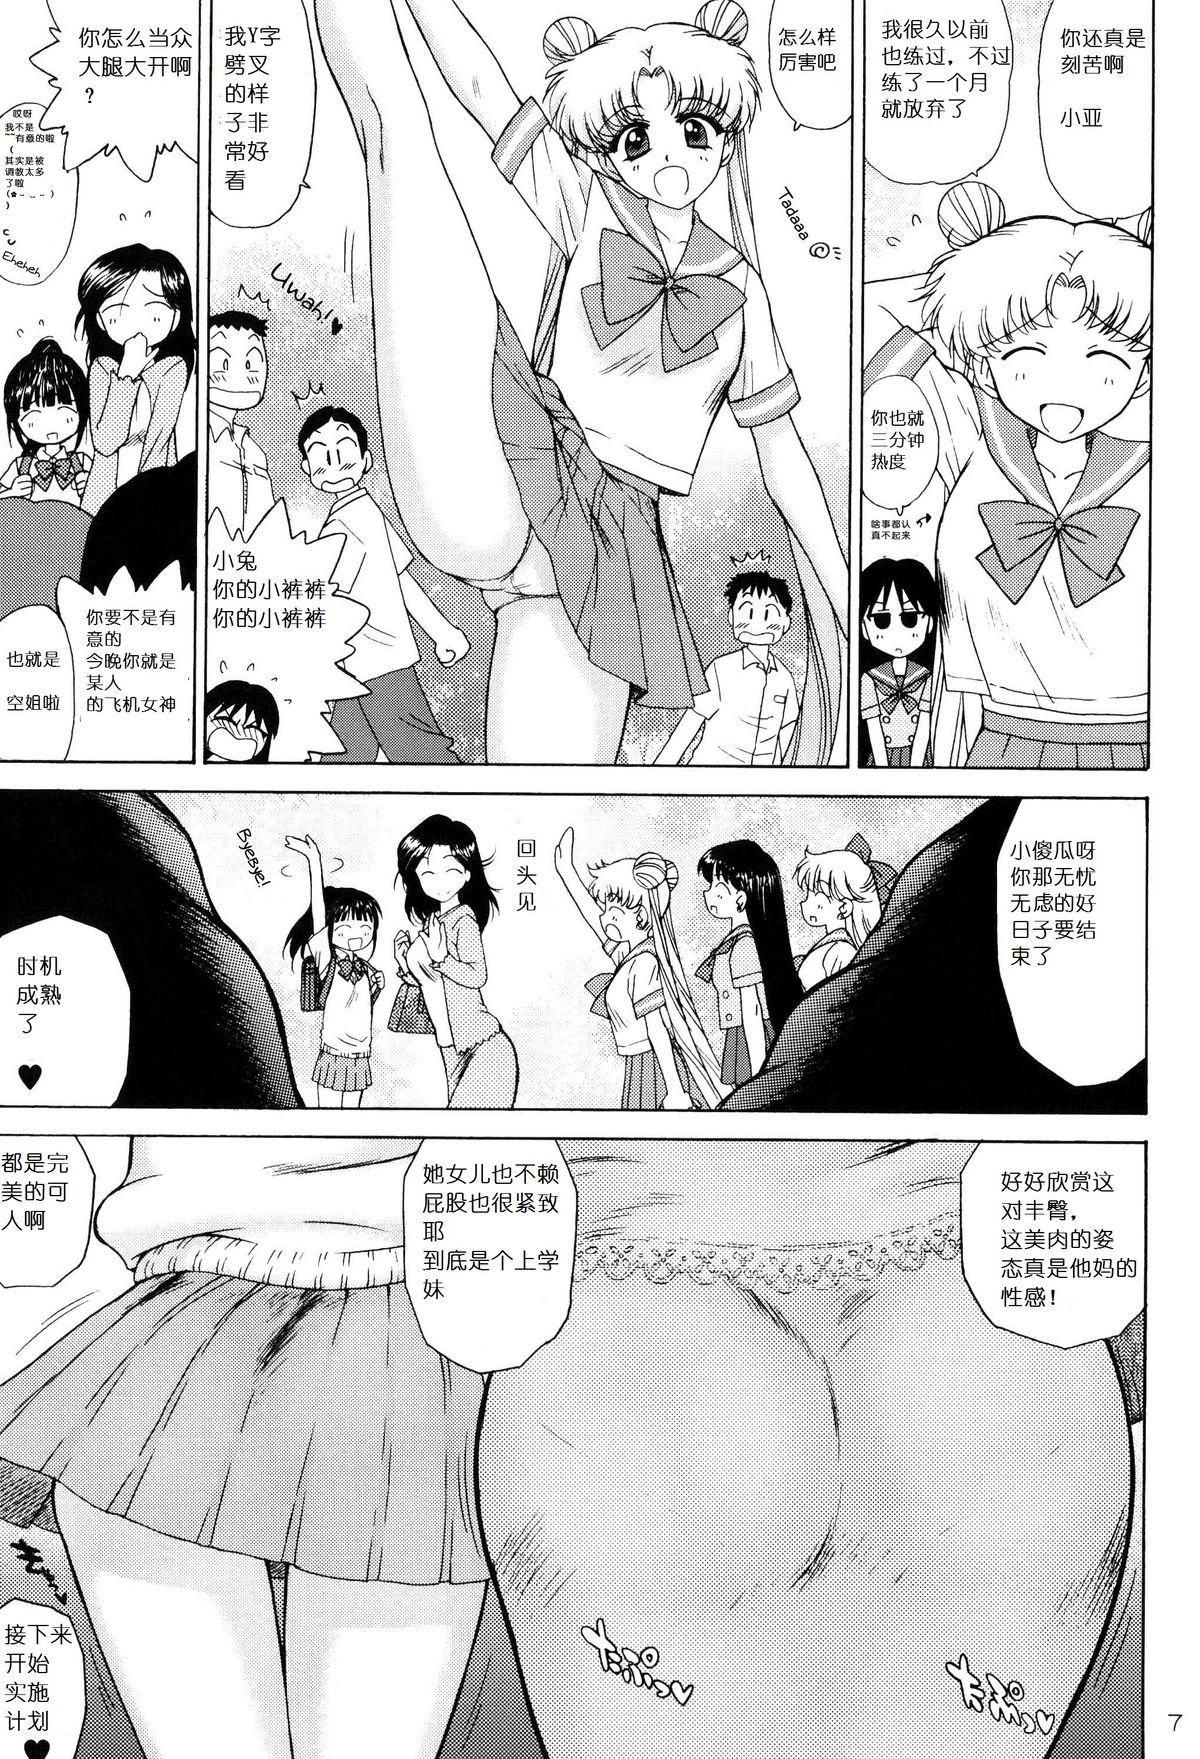 Vietnamese SUBMISSION-SUPER MOON - Sailor moon Babysitter - Page 7